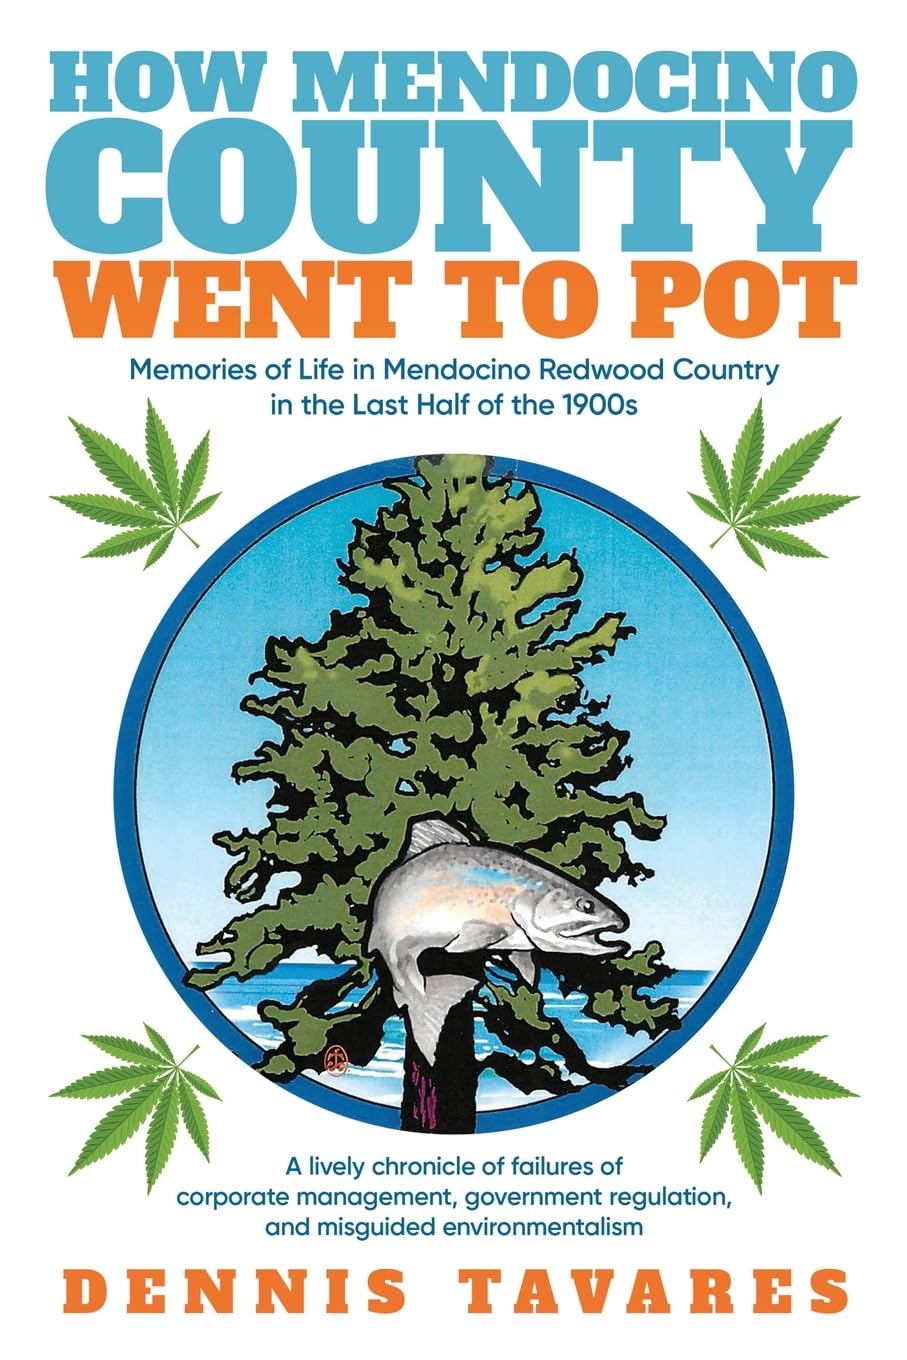 Dennis Tavares Unveils the Historic Battle and Ongoing Conservation for Mendocino's Redwoods and Fisheries in "How Mendocino County Went to Pot"